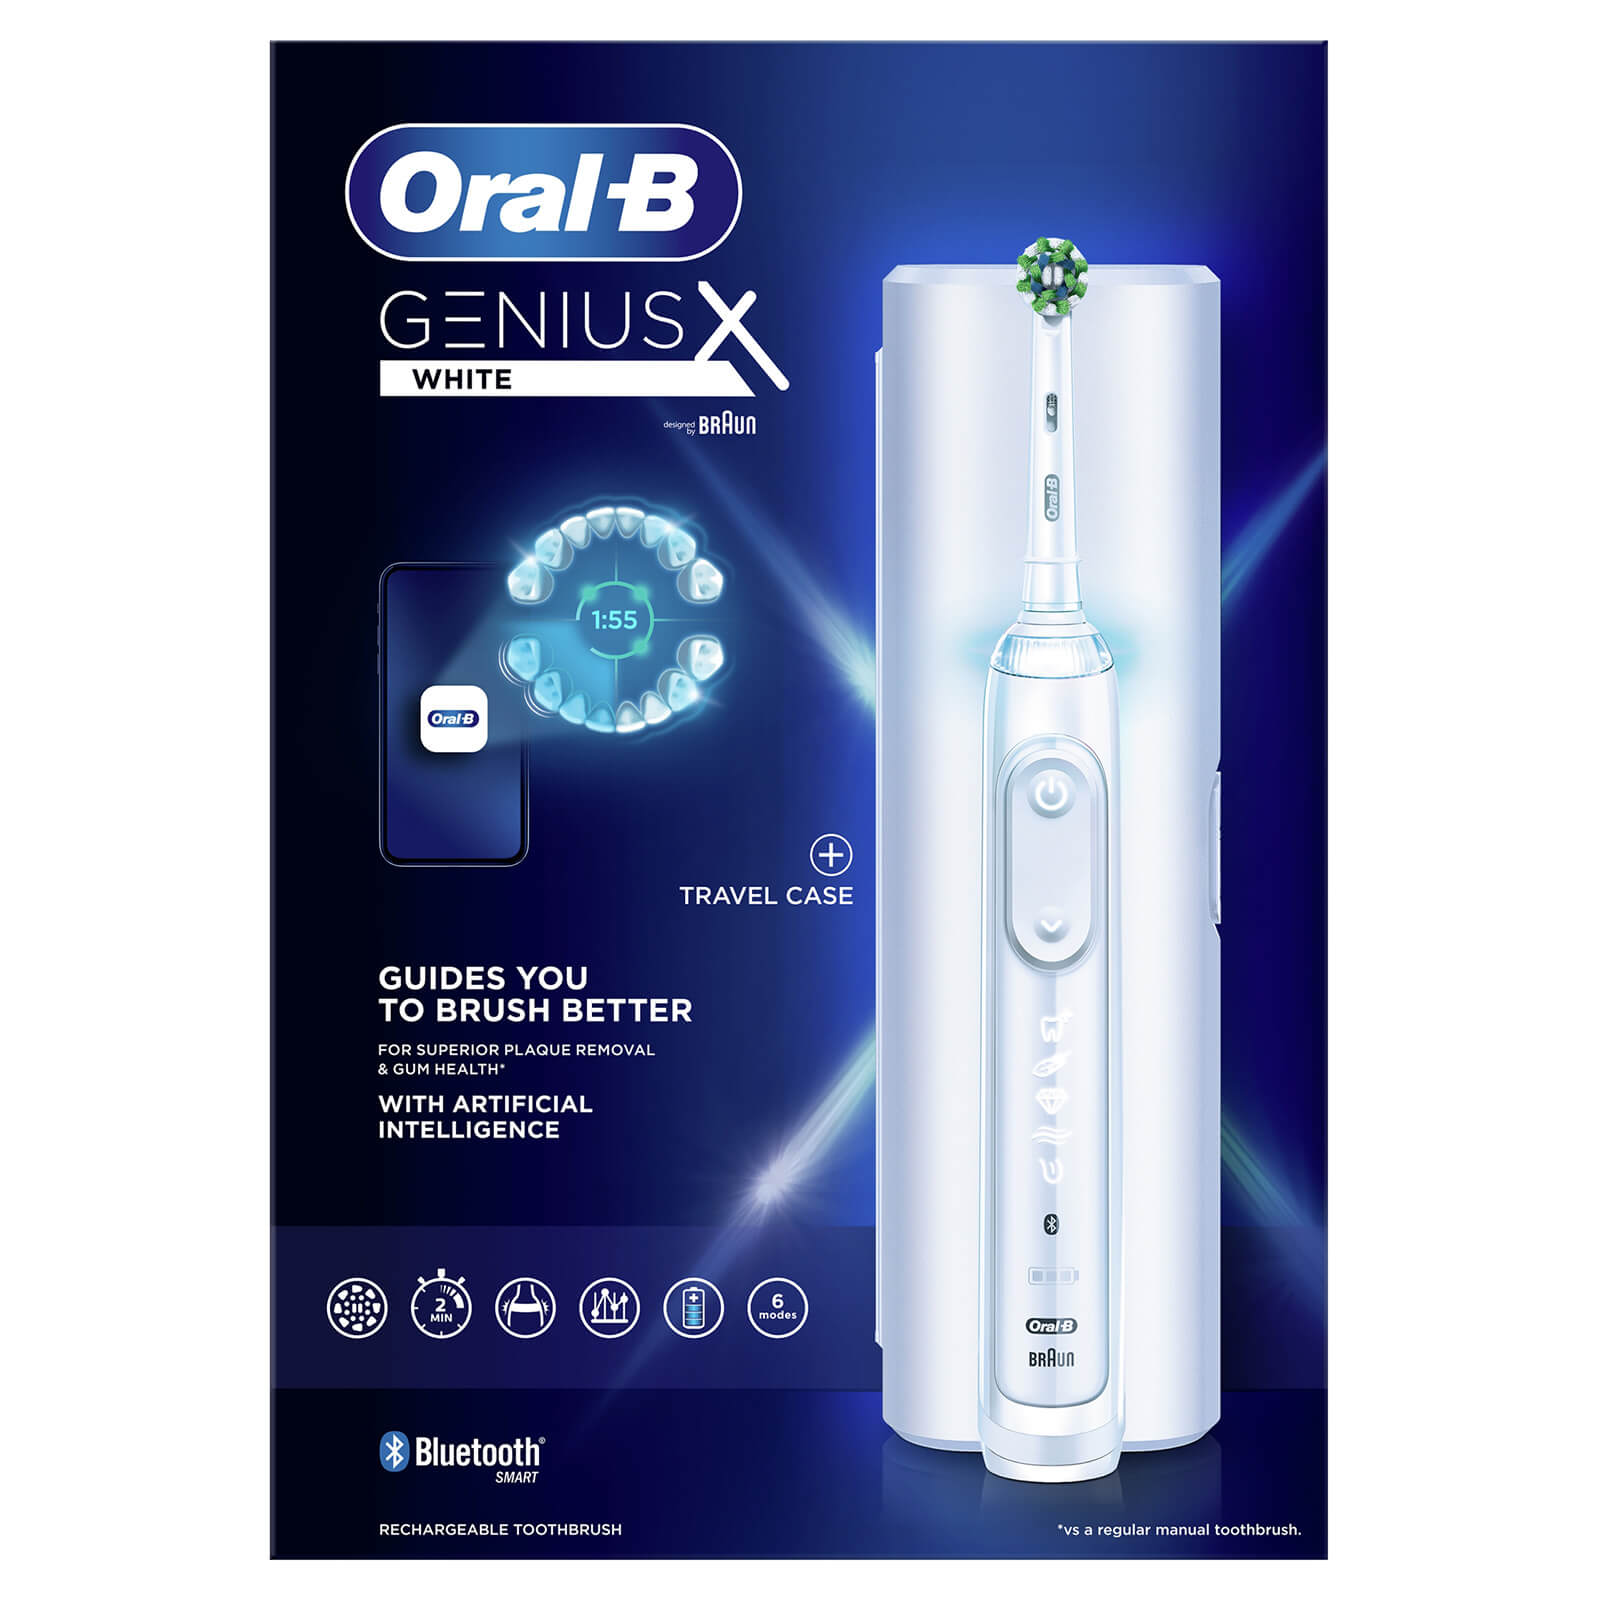 Oral-B Genius X White Electric Toothbrush with Travel Case - Toothbrush